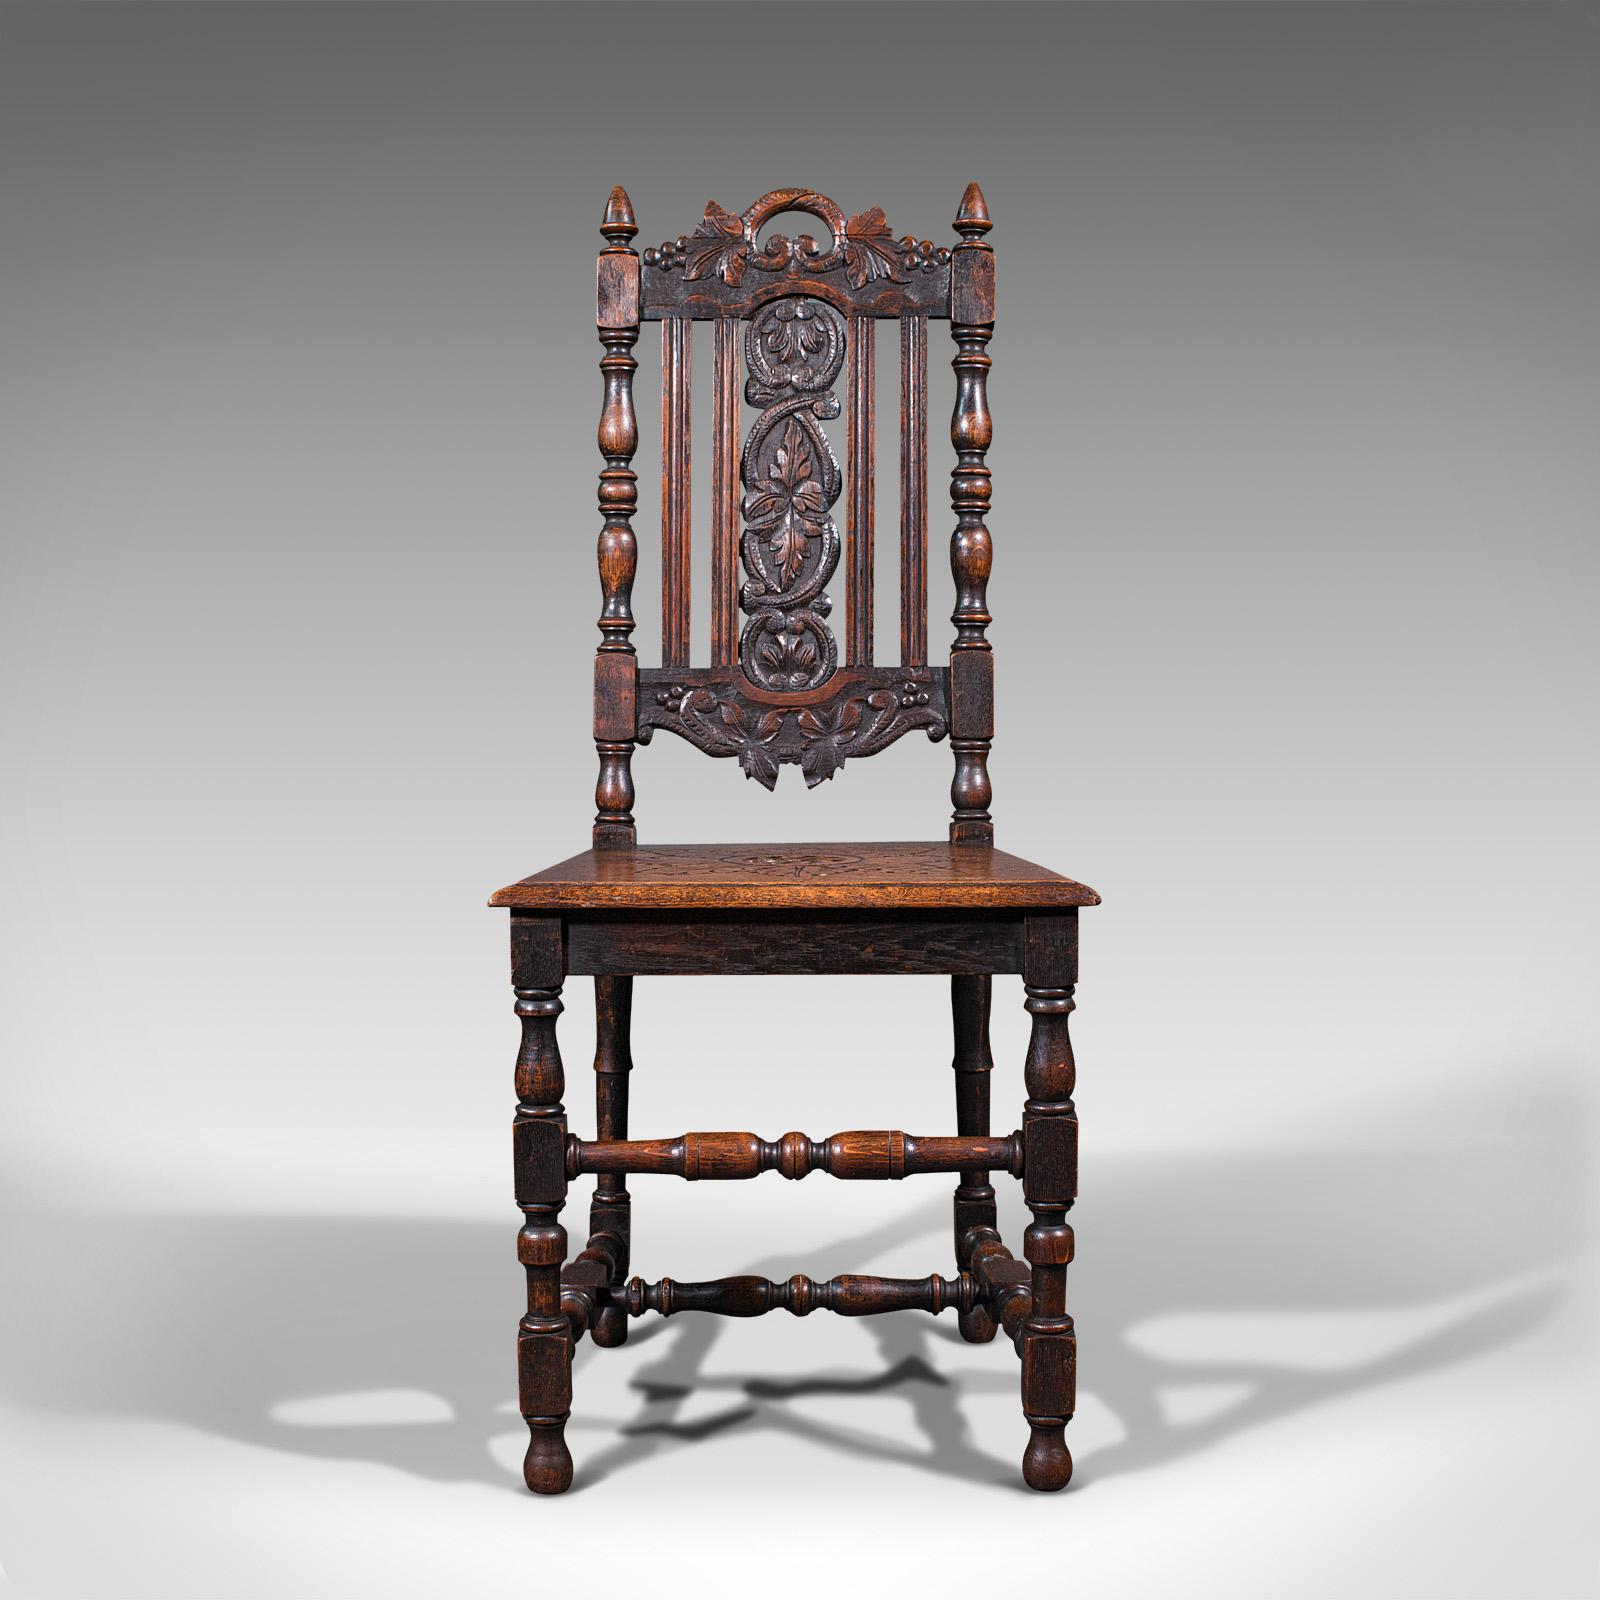 This is a pair of antique carved hall chairs. A Scottish, oak decorative side seat, dating to the Victorian period, circa 1870.

Profusely carved with leaf and foliate detail throughout
Displays a desirable aged patina and in good order
Select